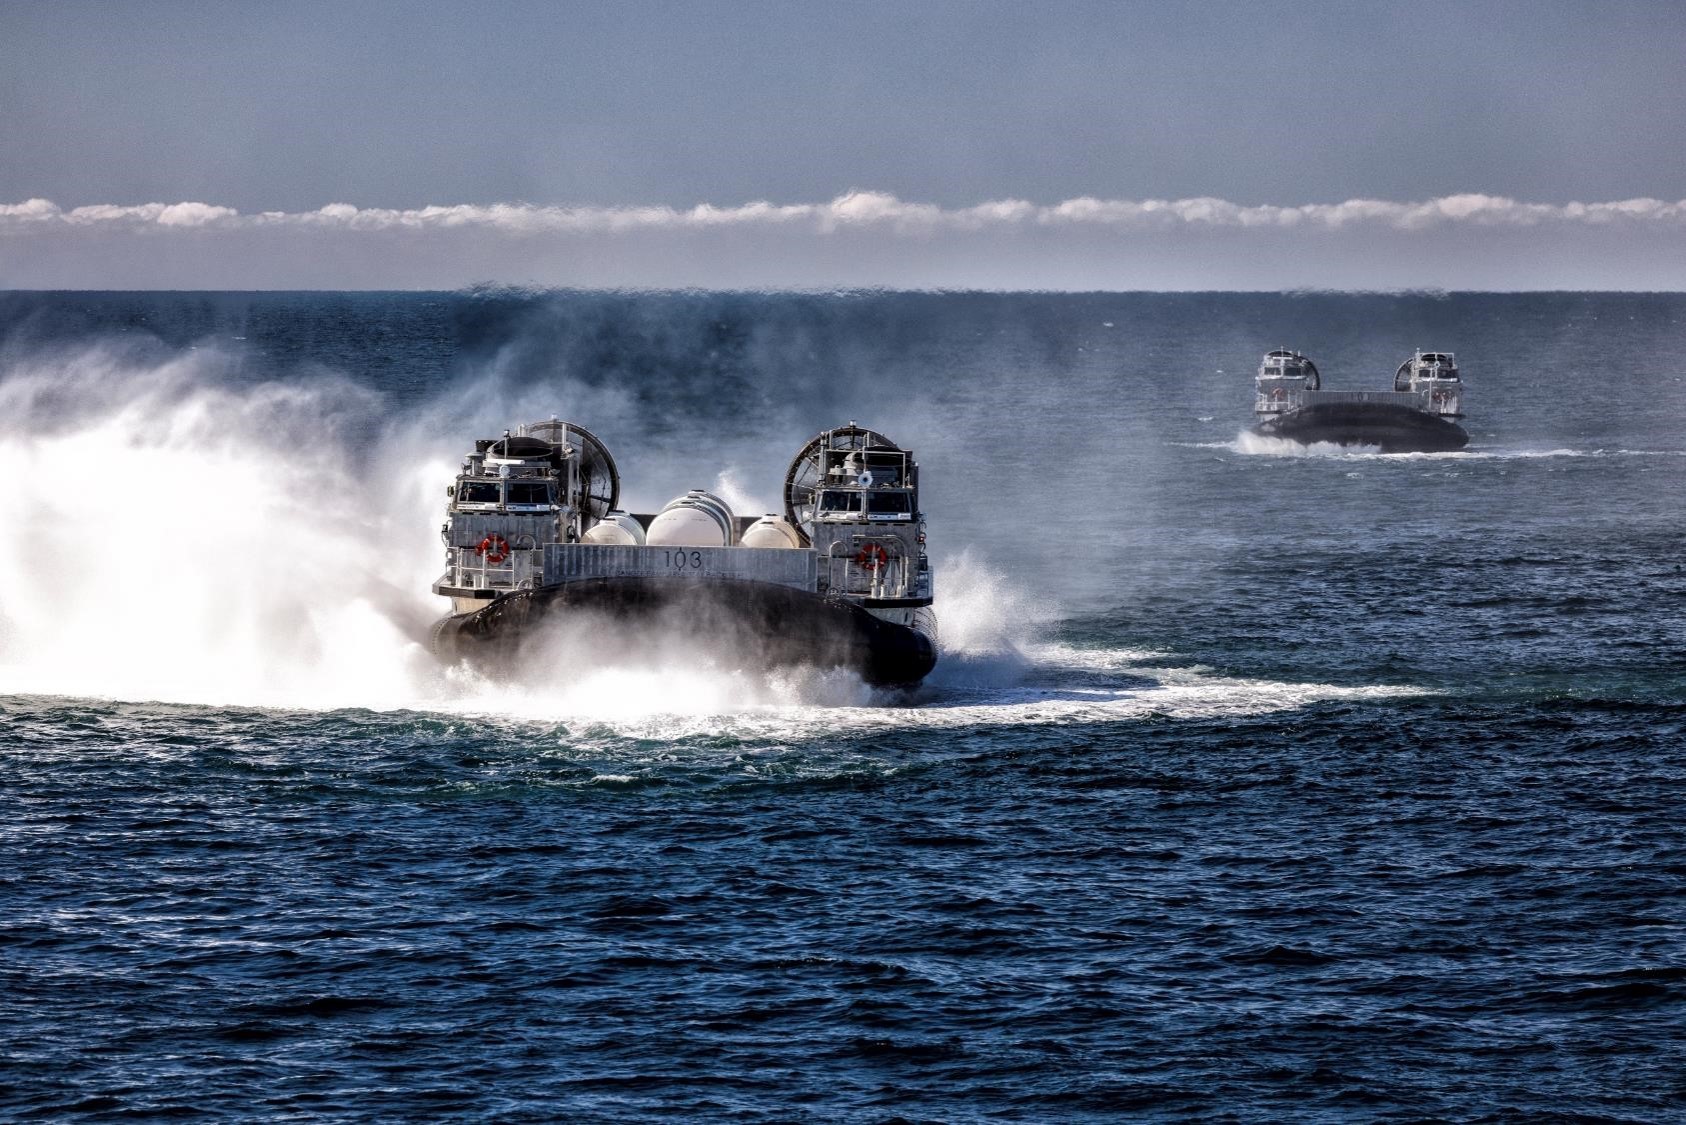 The next generation landing craft, Ship to Shore Connector